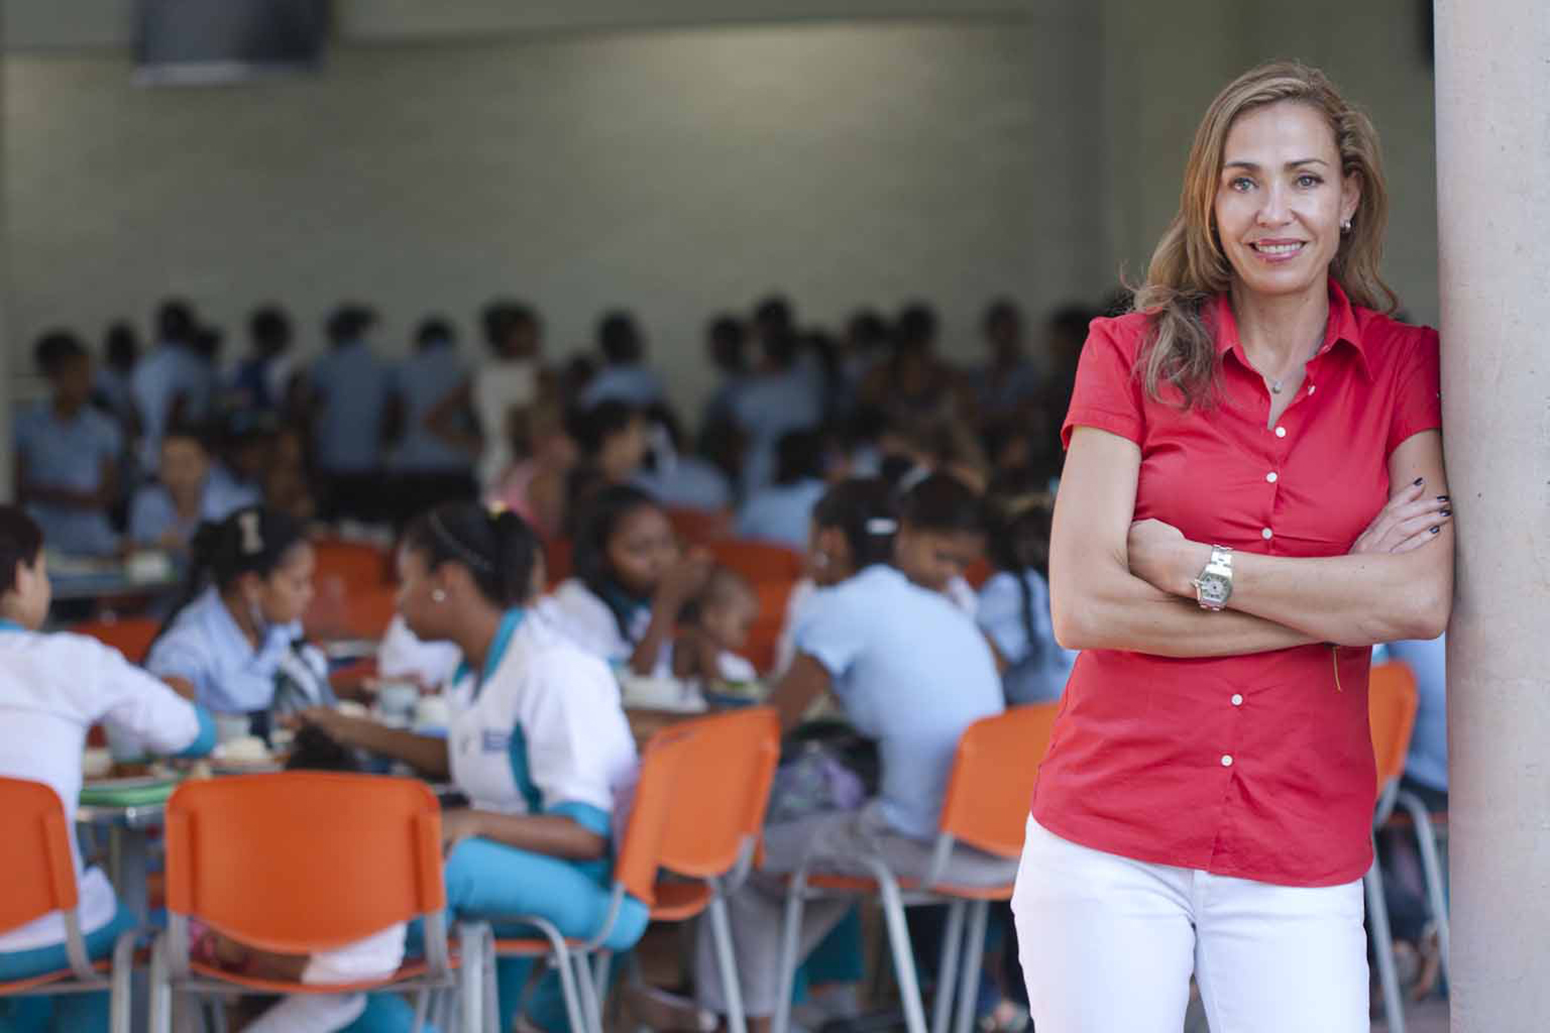 Esteemed social entrepreneur Catalina Escobar ’93 will speak at Clark’s Commencement, May 22. She is pictured here at the Juanfe Foundation in Colombia, which she created and directs.